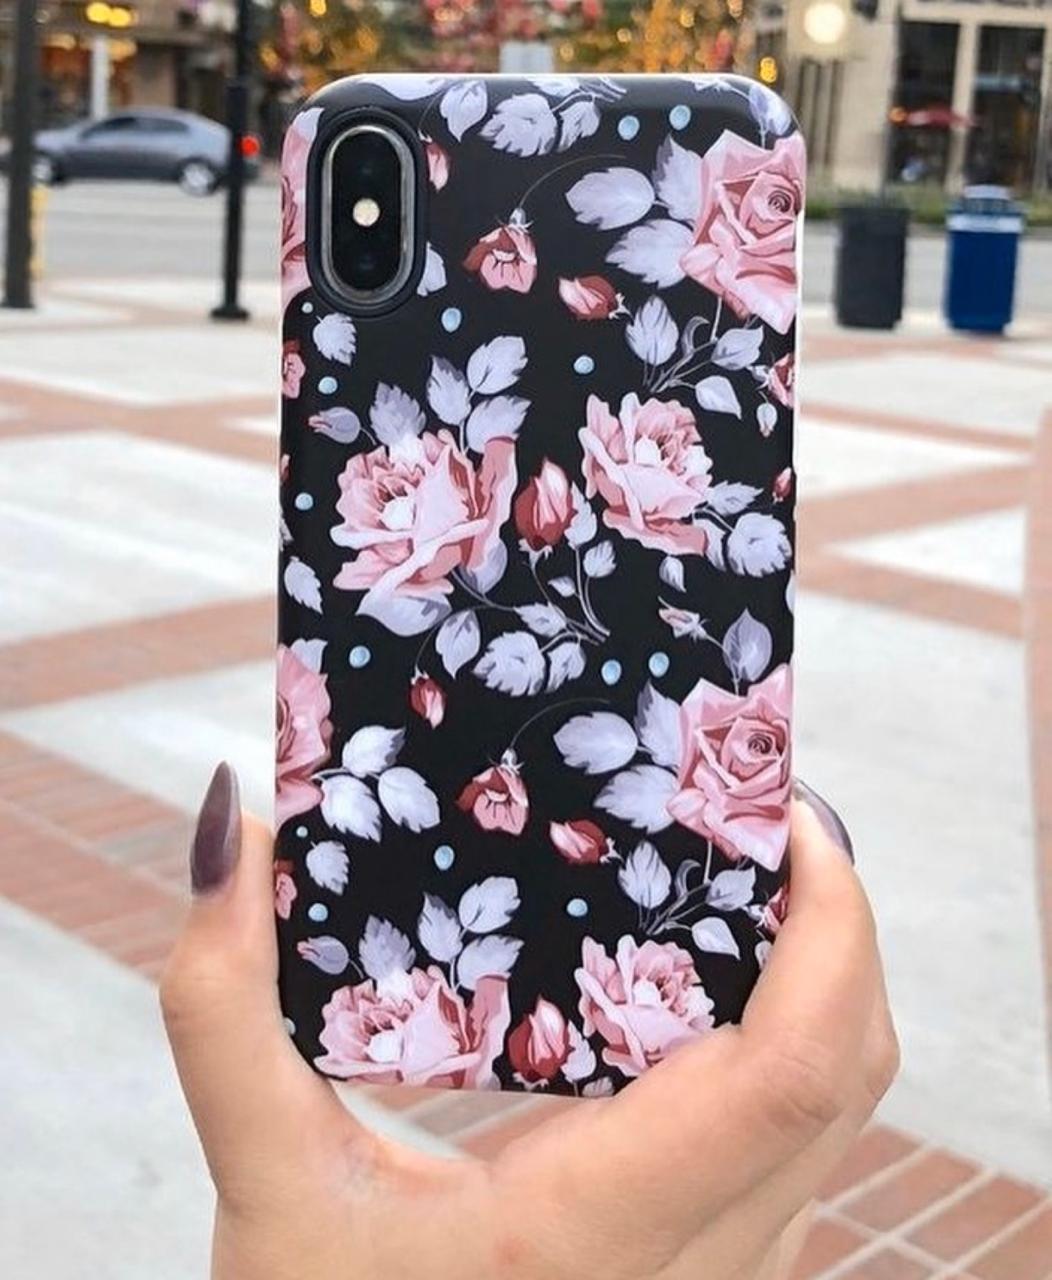 The Floral Love Slim Case Cover